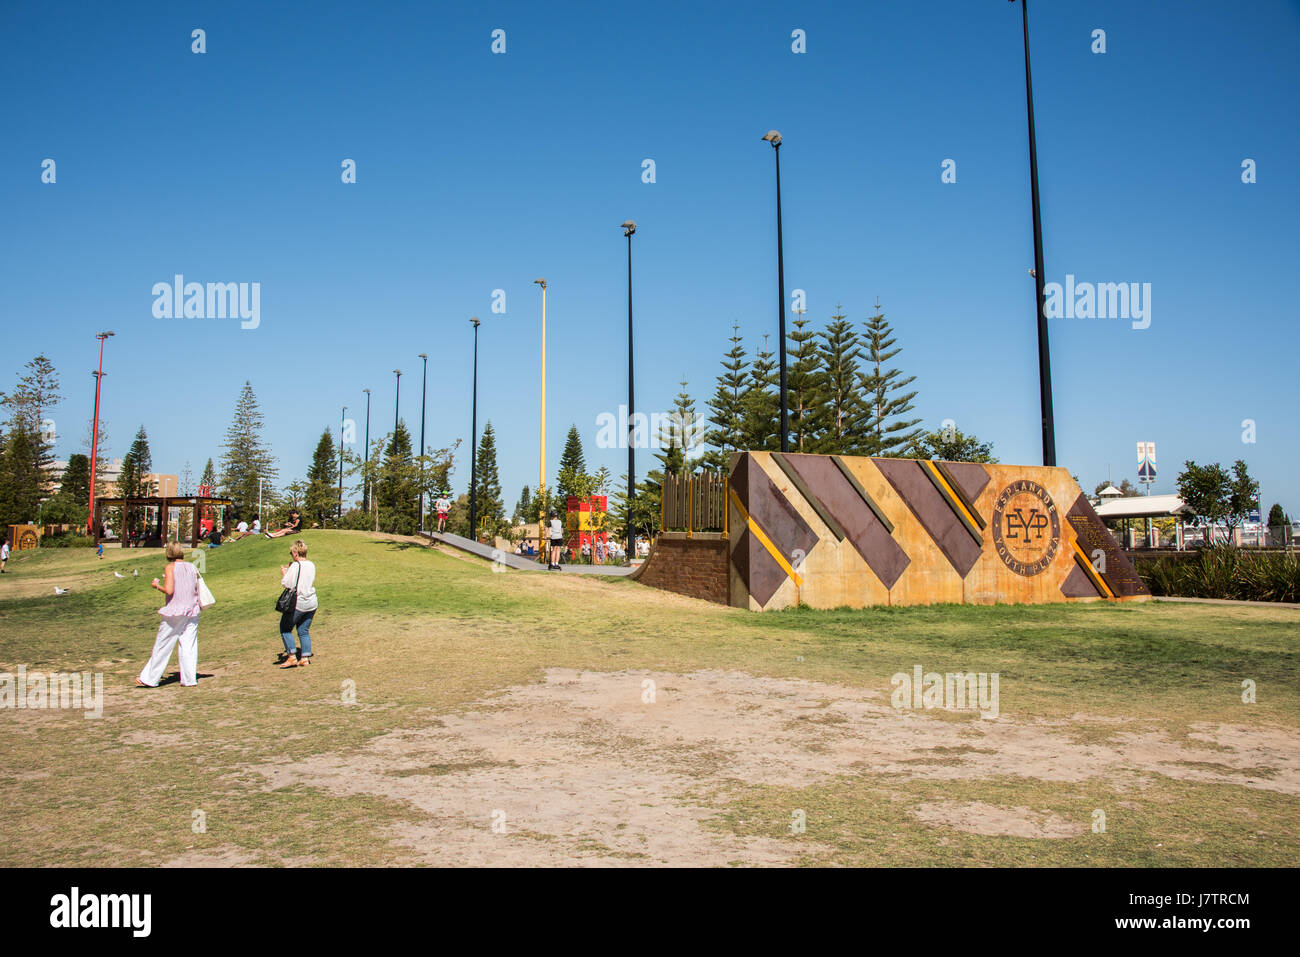 Fremantle,WA,Australia-November 13,2016: Tourists and youth at the Esplanade Park with skate park and Norfolk pines in Fremantle, Western Australia. Stock Photo